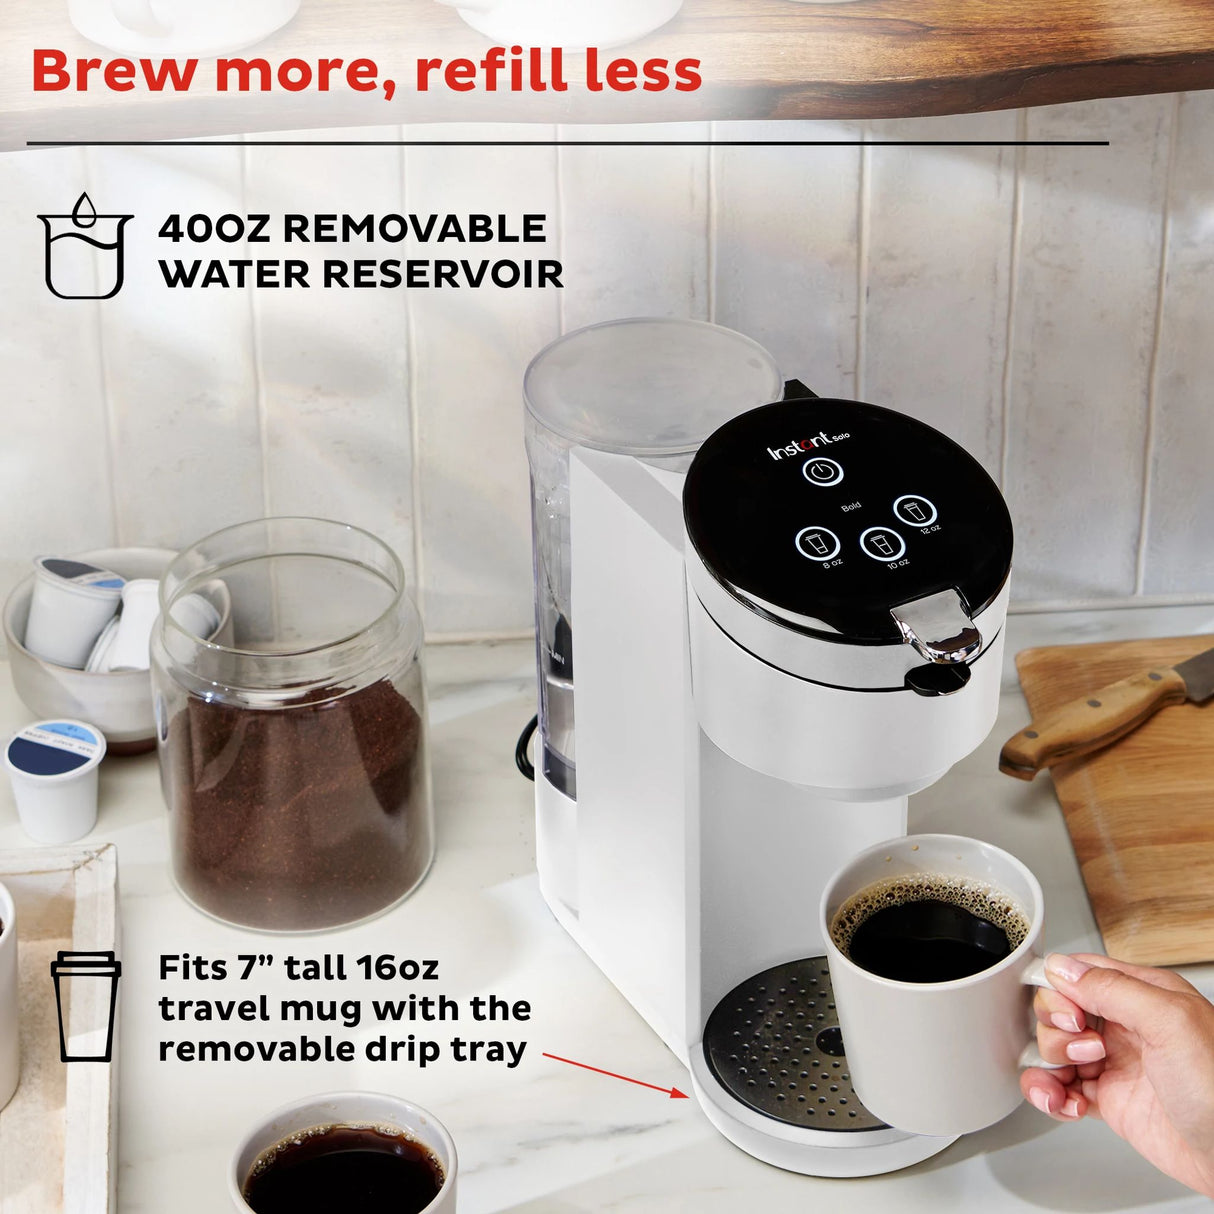  Instant Solo White Single Serve Coffee Maker with text brew more, refill less